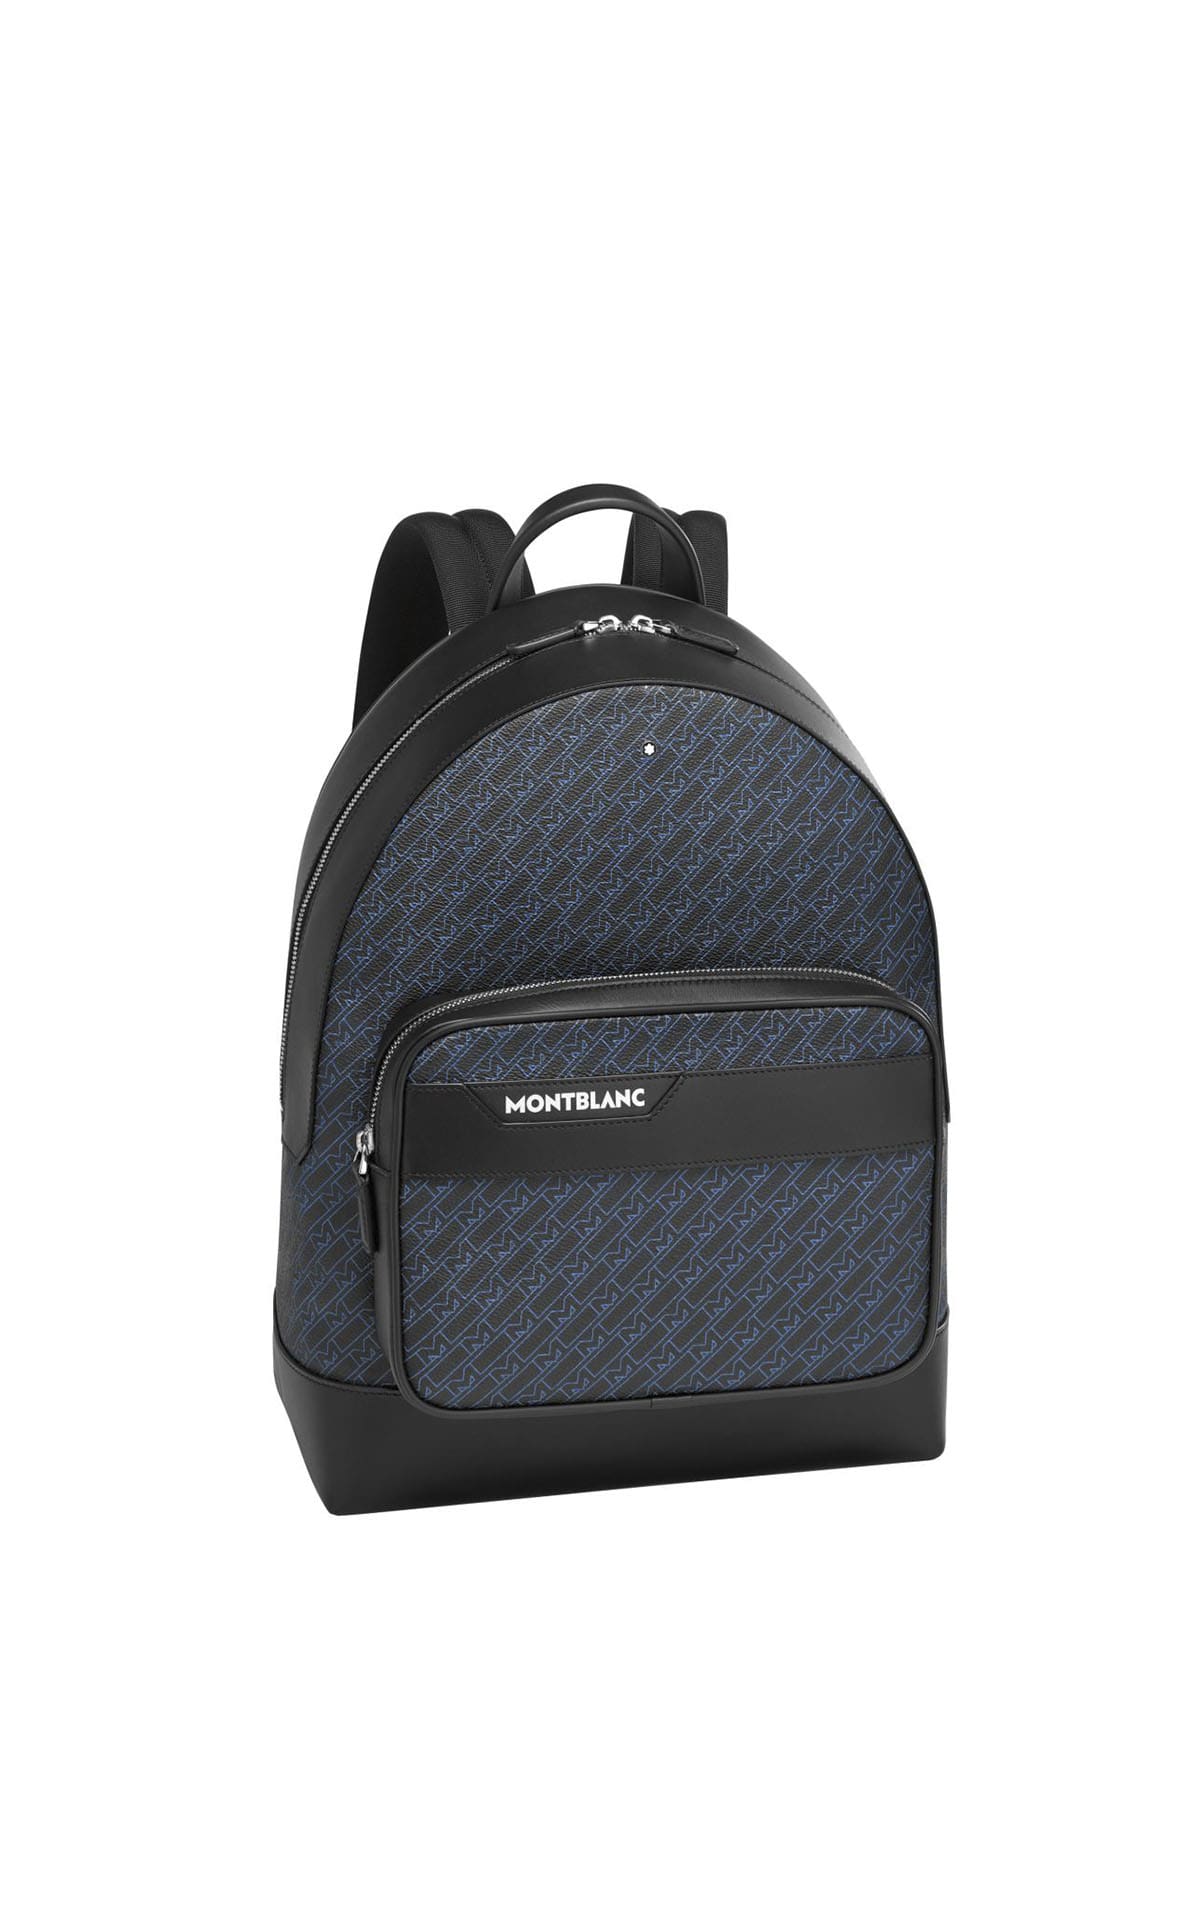 Black leather backpack with white letters Montblanc